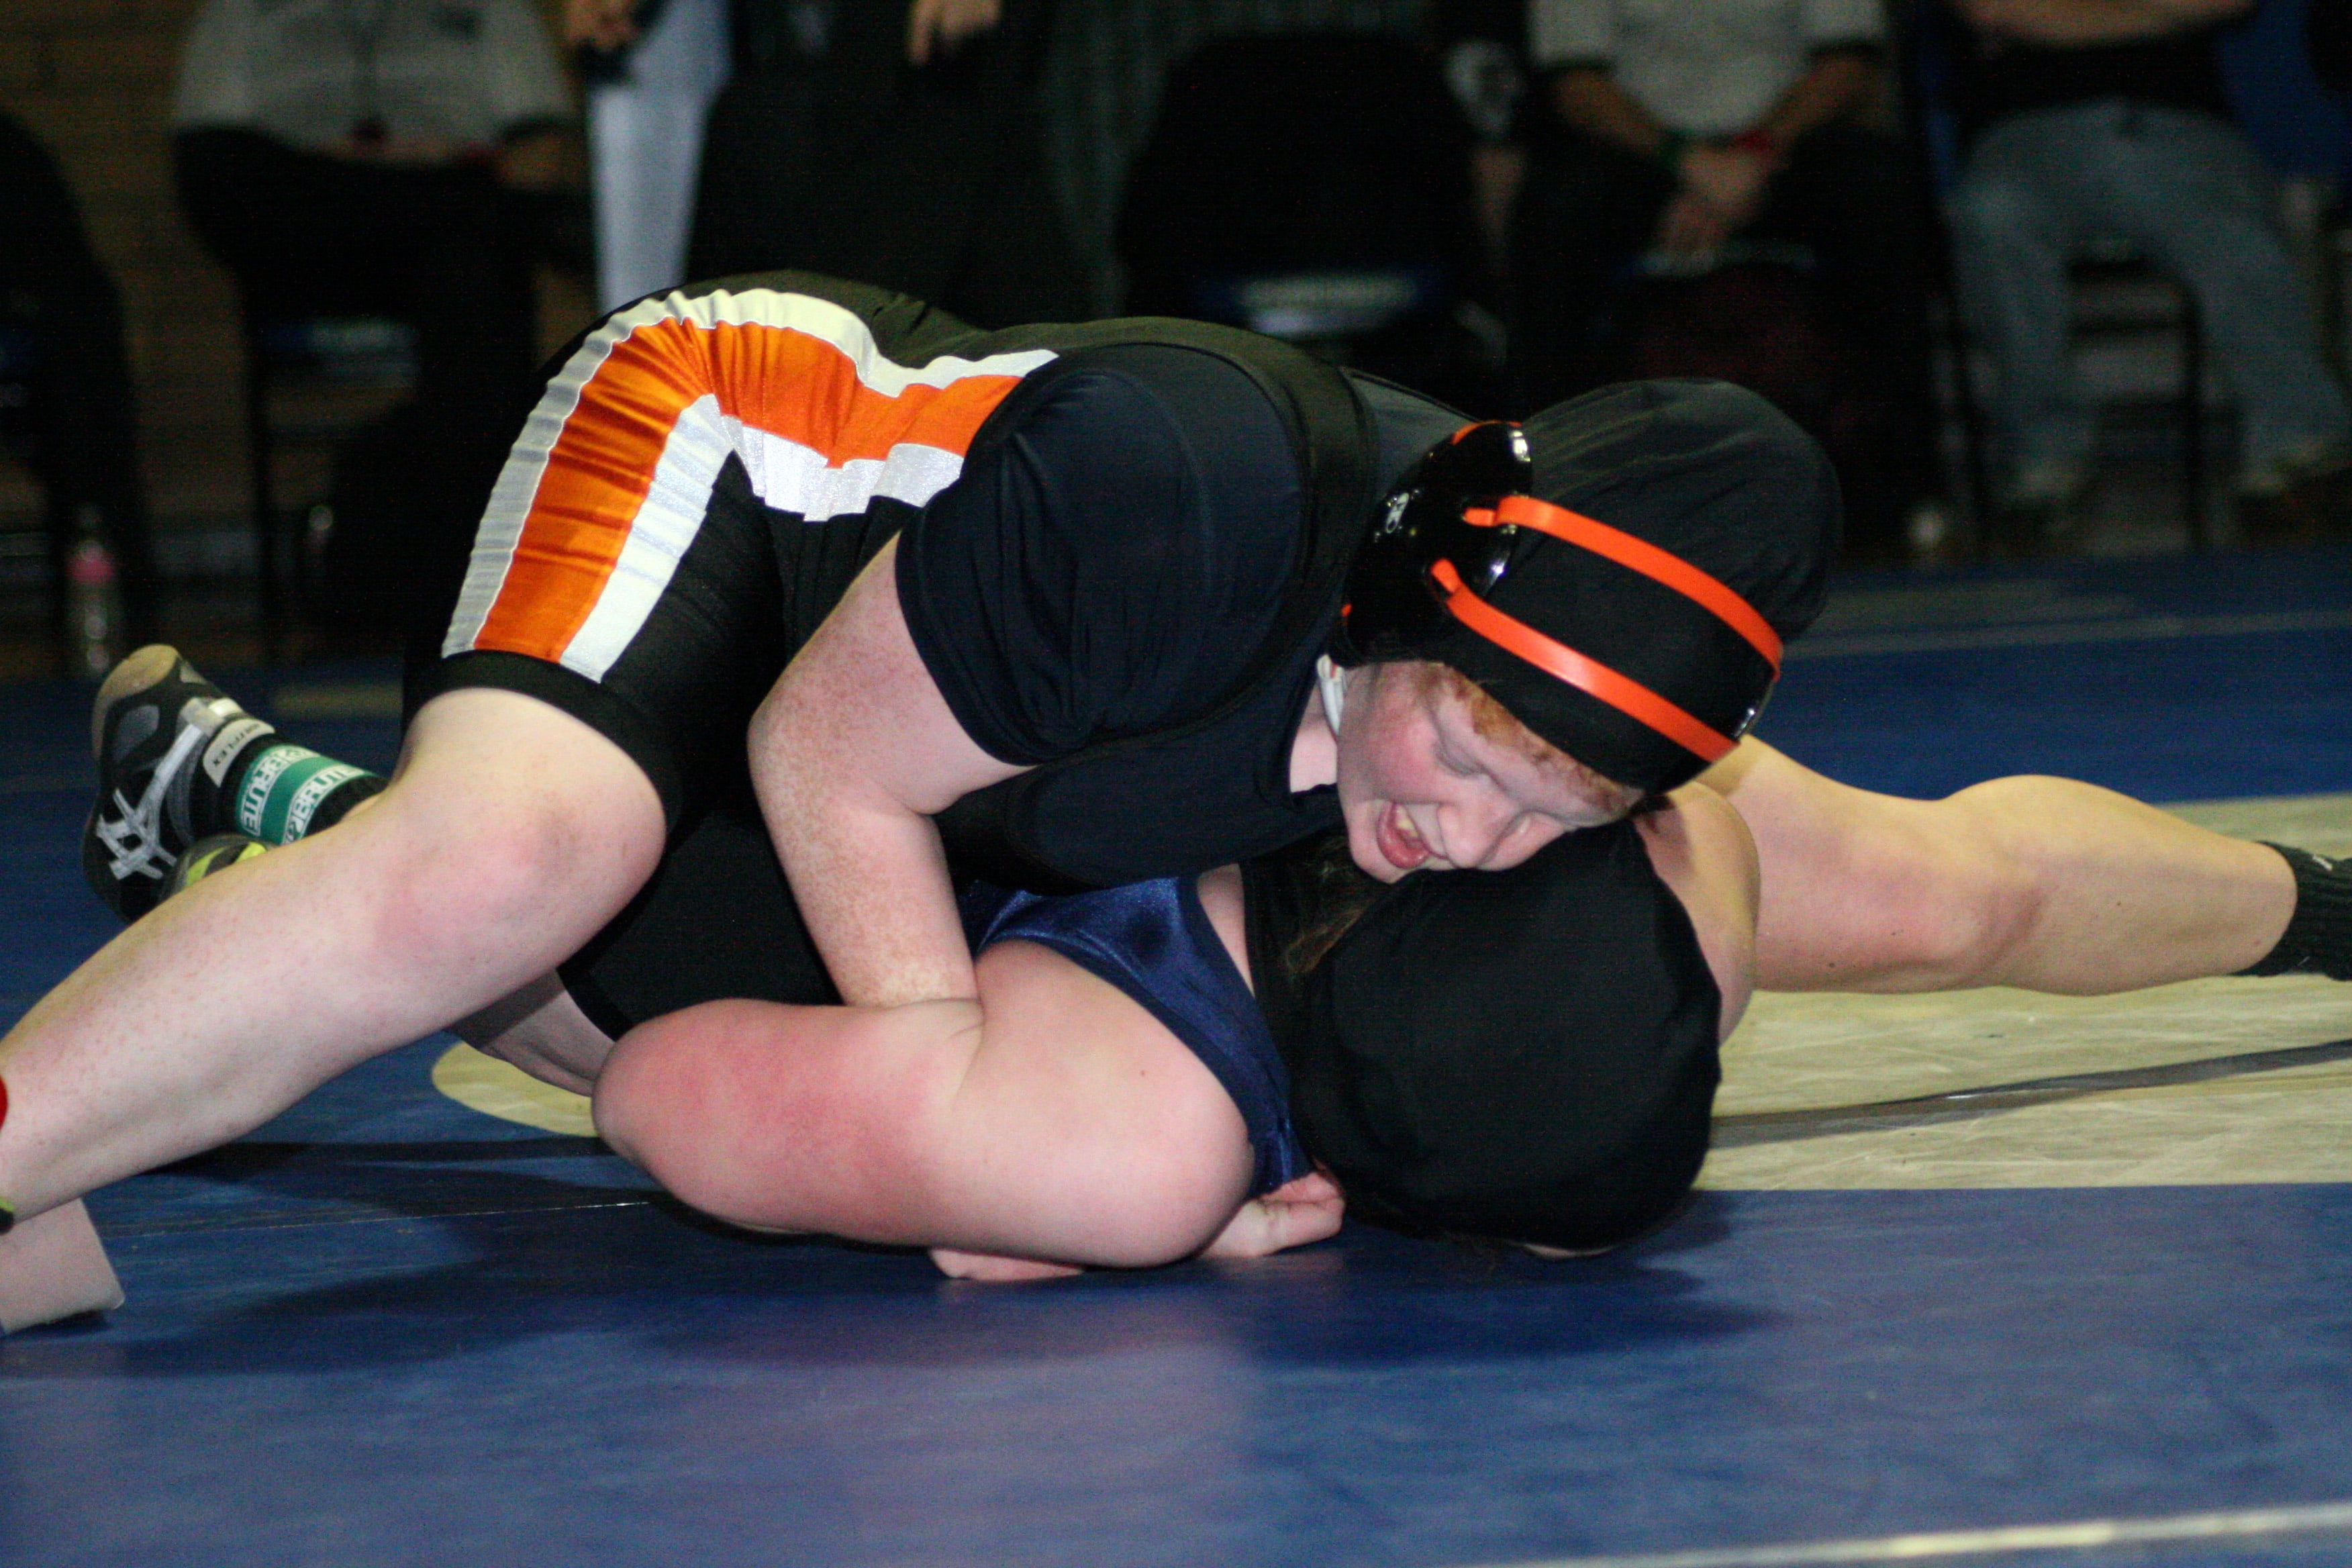 Abby Lees earned the 155-pound championship for Washougal.